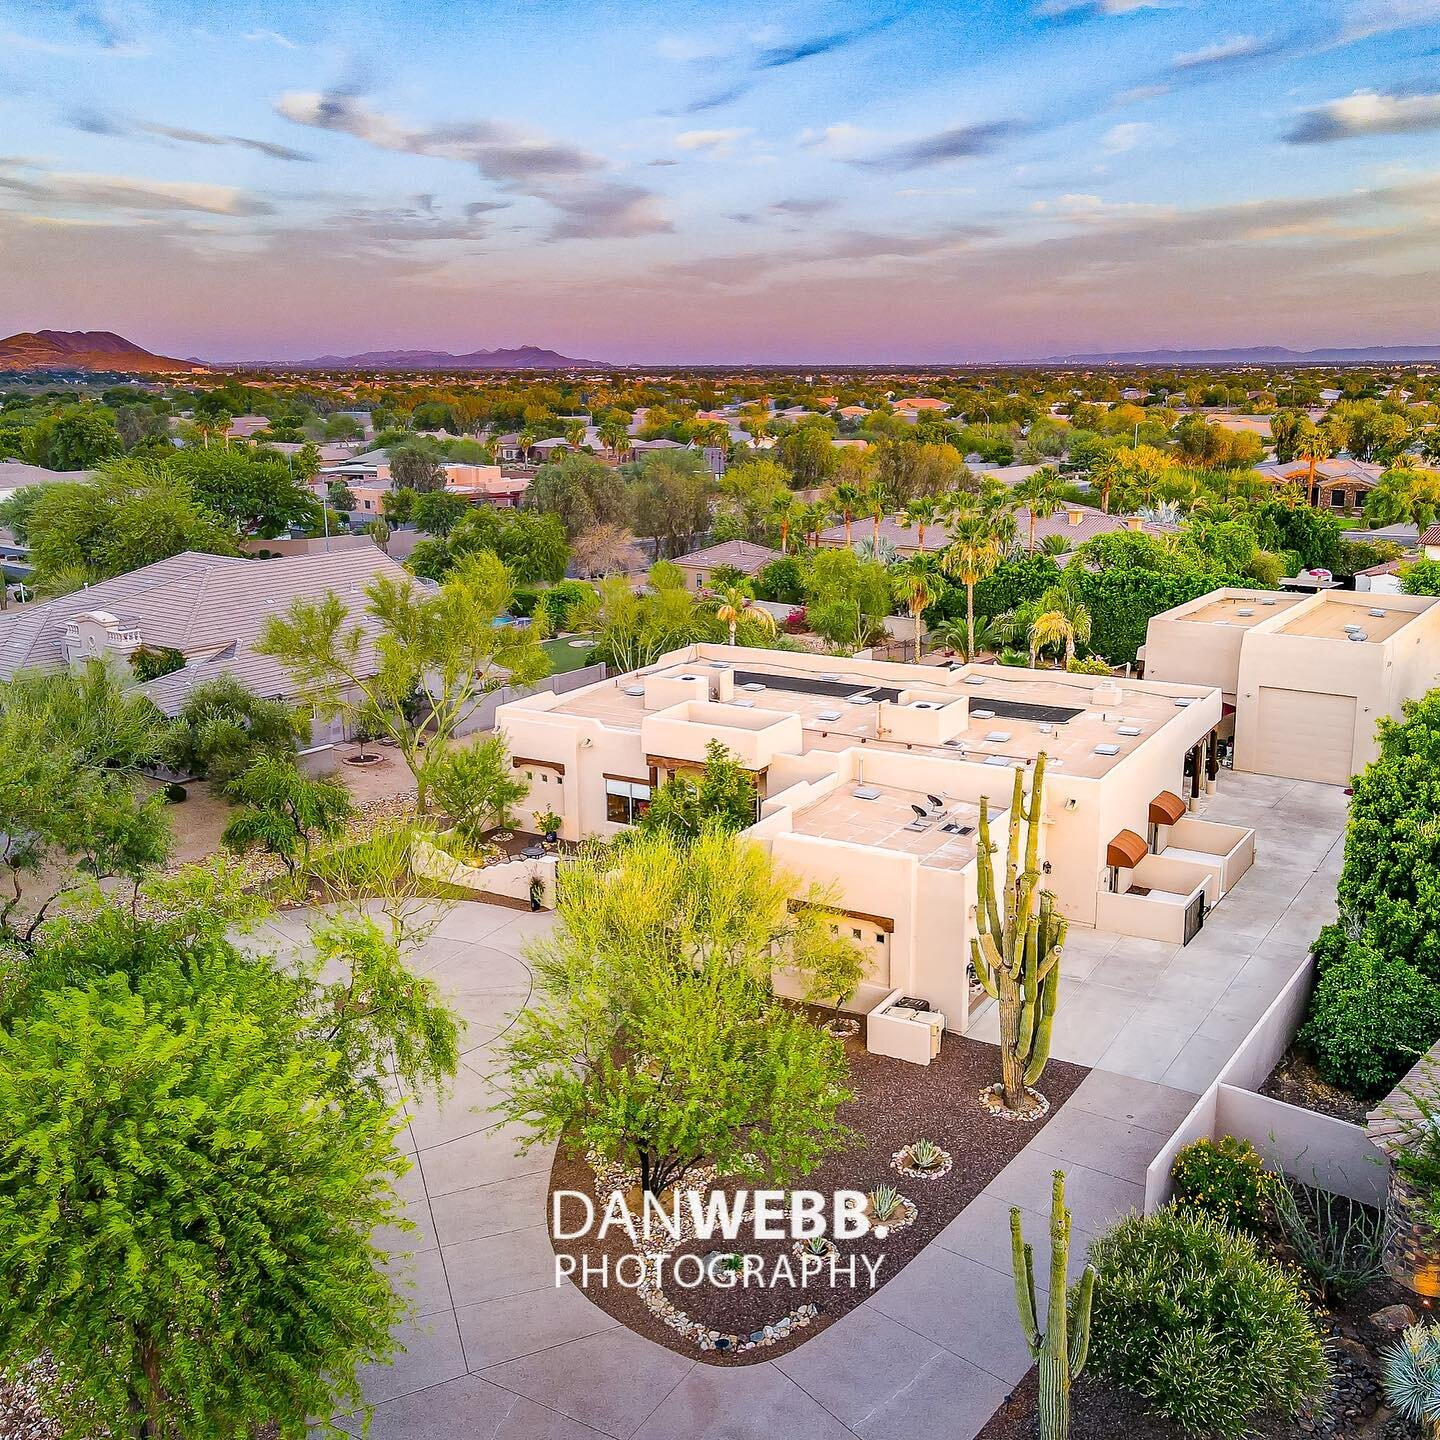 Sky was looking good tonight for my shoot in Peoria. Check out the second image, pretty cool pool!

#azphotographer #azphotography #gilbert #azrealestate #arizonaphotographer #family #realestate #gilbertaz #azfamily #azfamilyphotographer #phxphotogra